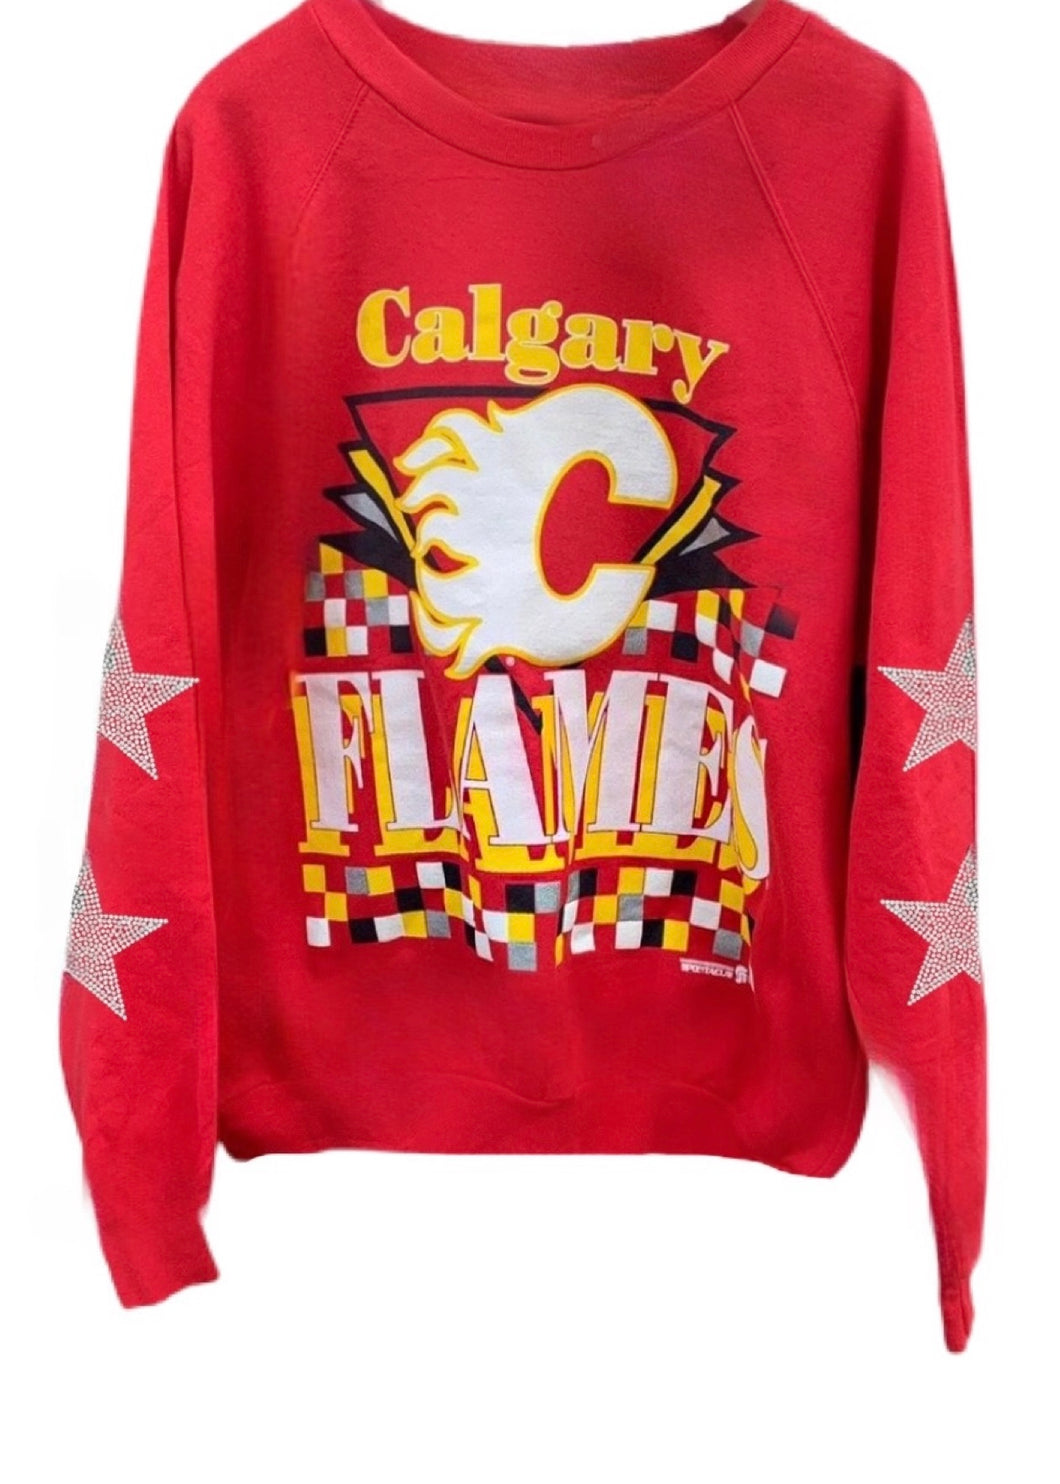 Calgary Flames, NHL “Rare Find”  One of a KIND Vintage Sweatshirt with Crystal Star Design